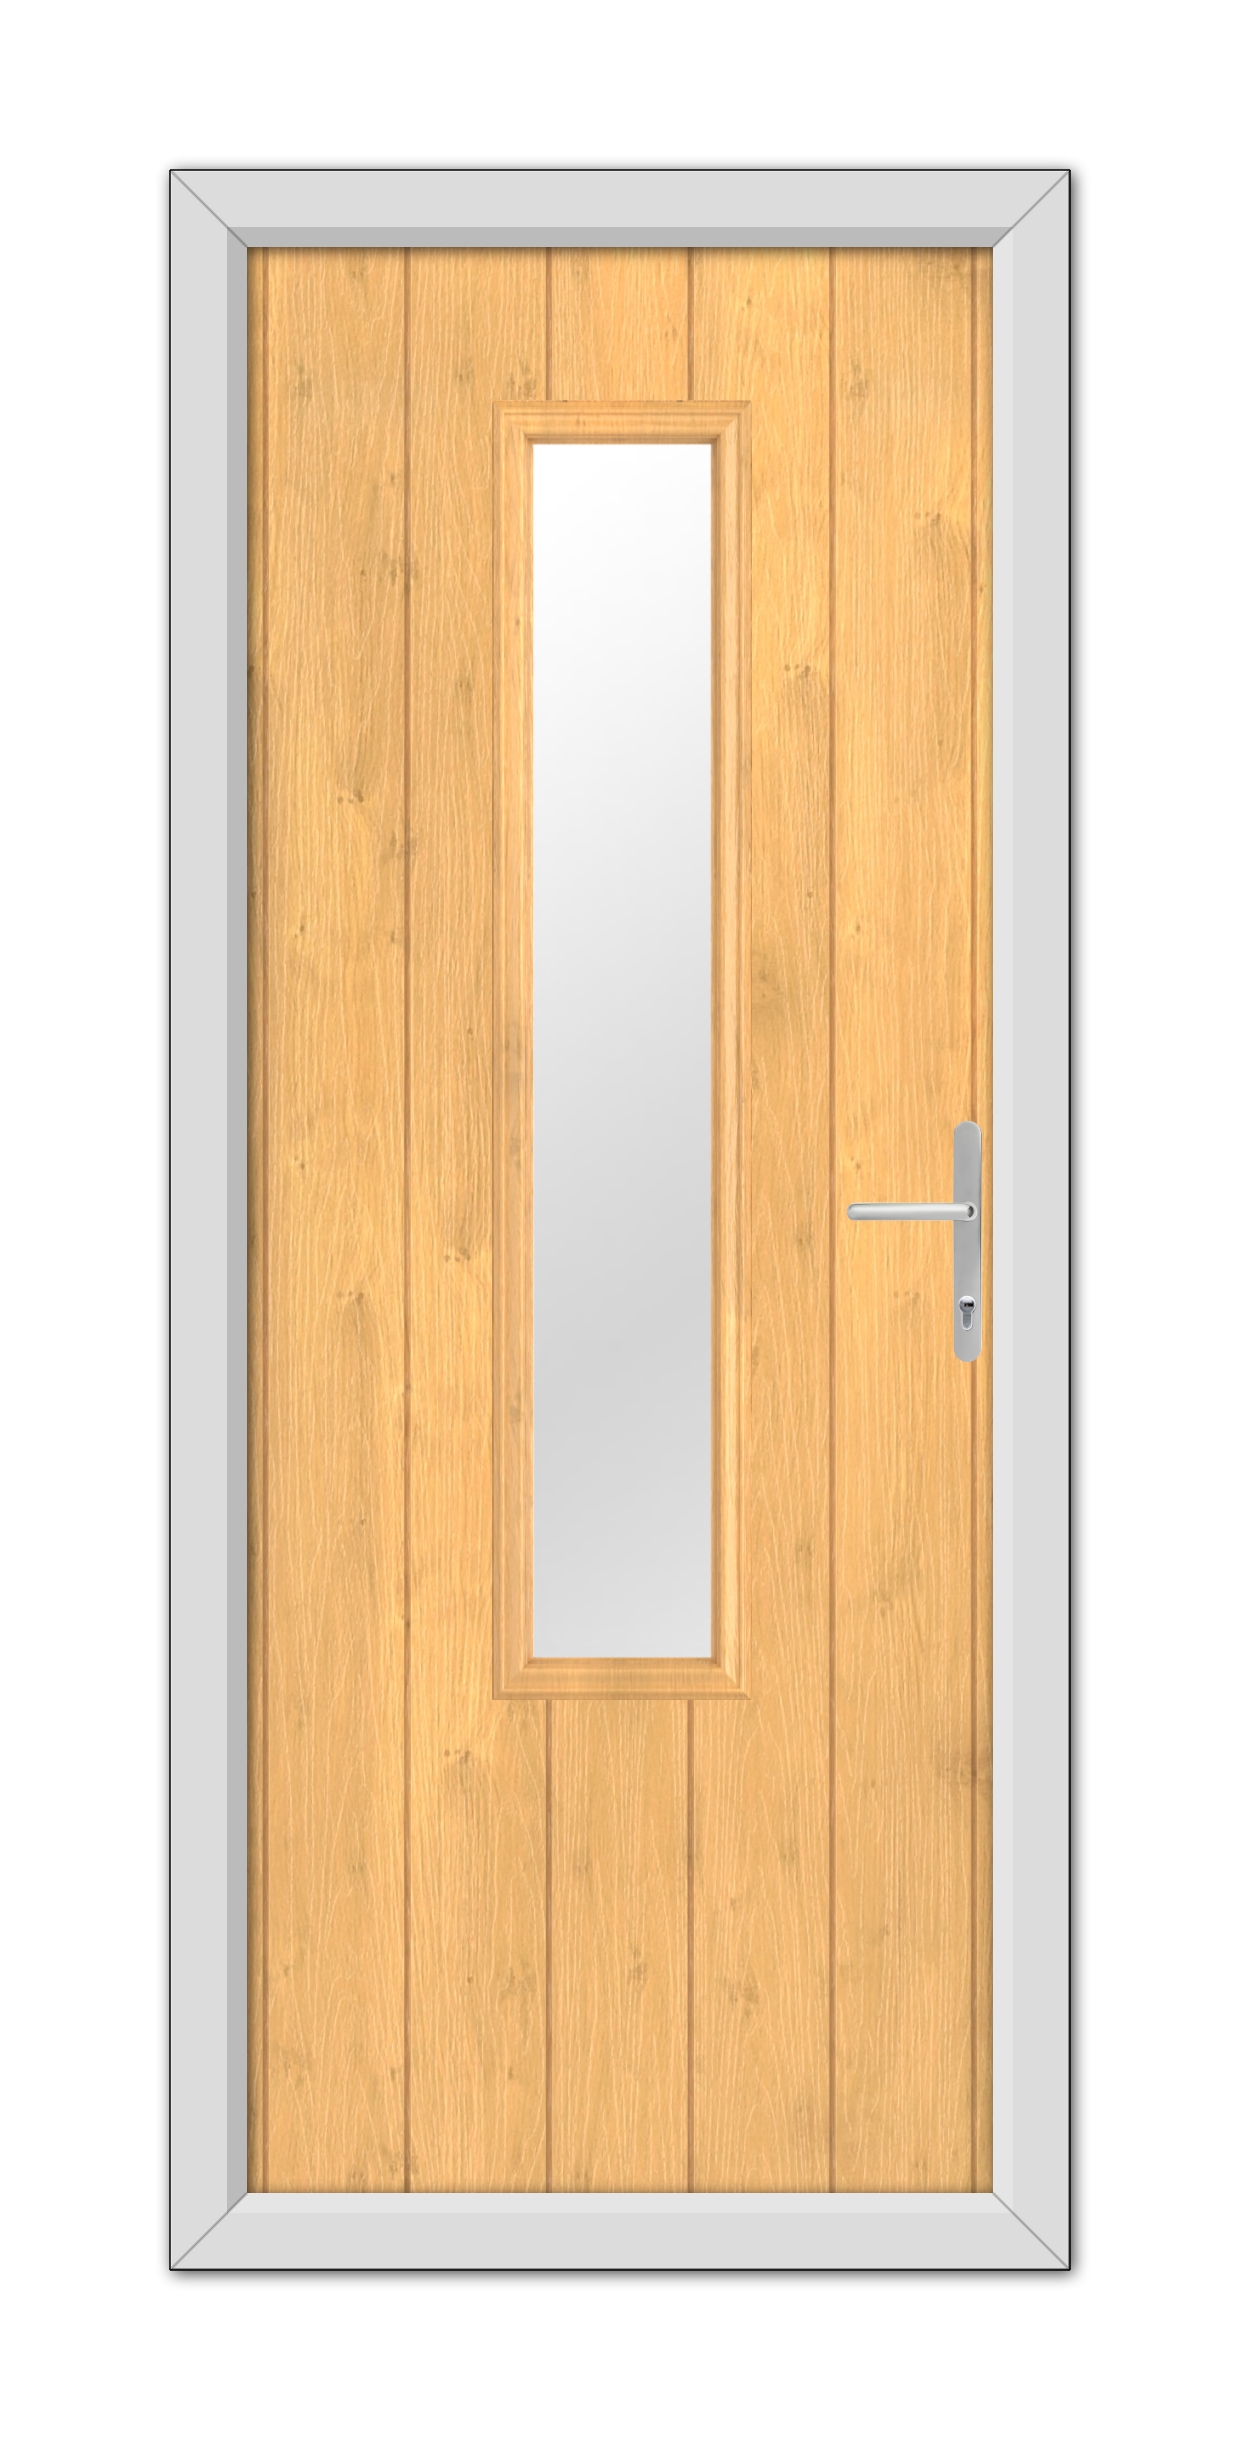 A Irish Oak Abercorn Composite Door 48mm Timber Core with a vertical rectangular window and a modern handle, framed by a grey metal doorframe, viewed from the front.